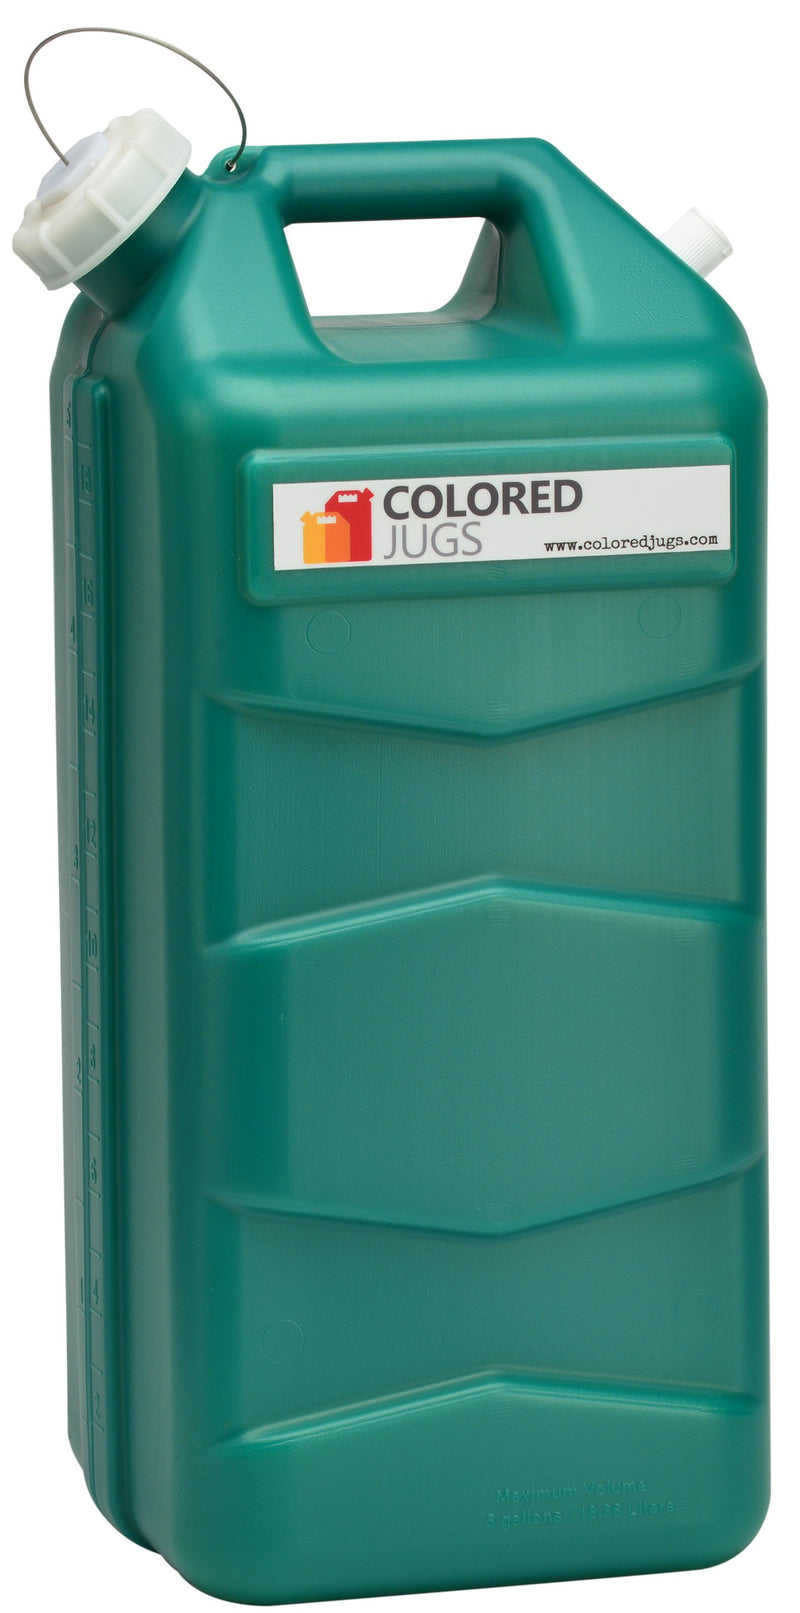 Colored Jugs - Color Coded Translucent Chemical Containers